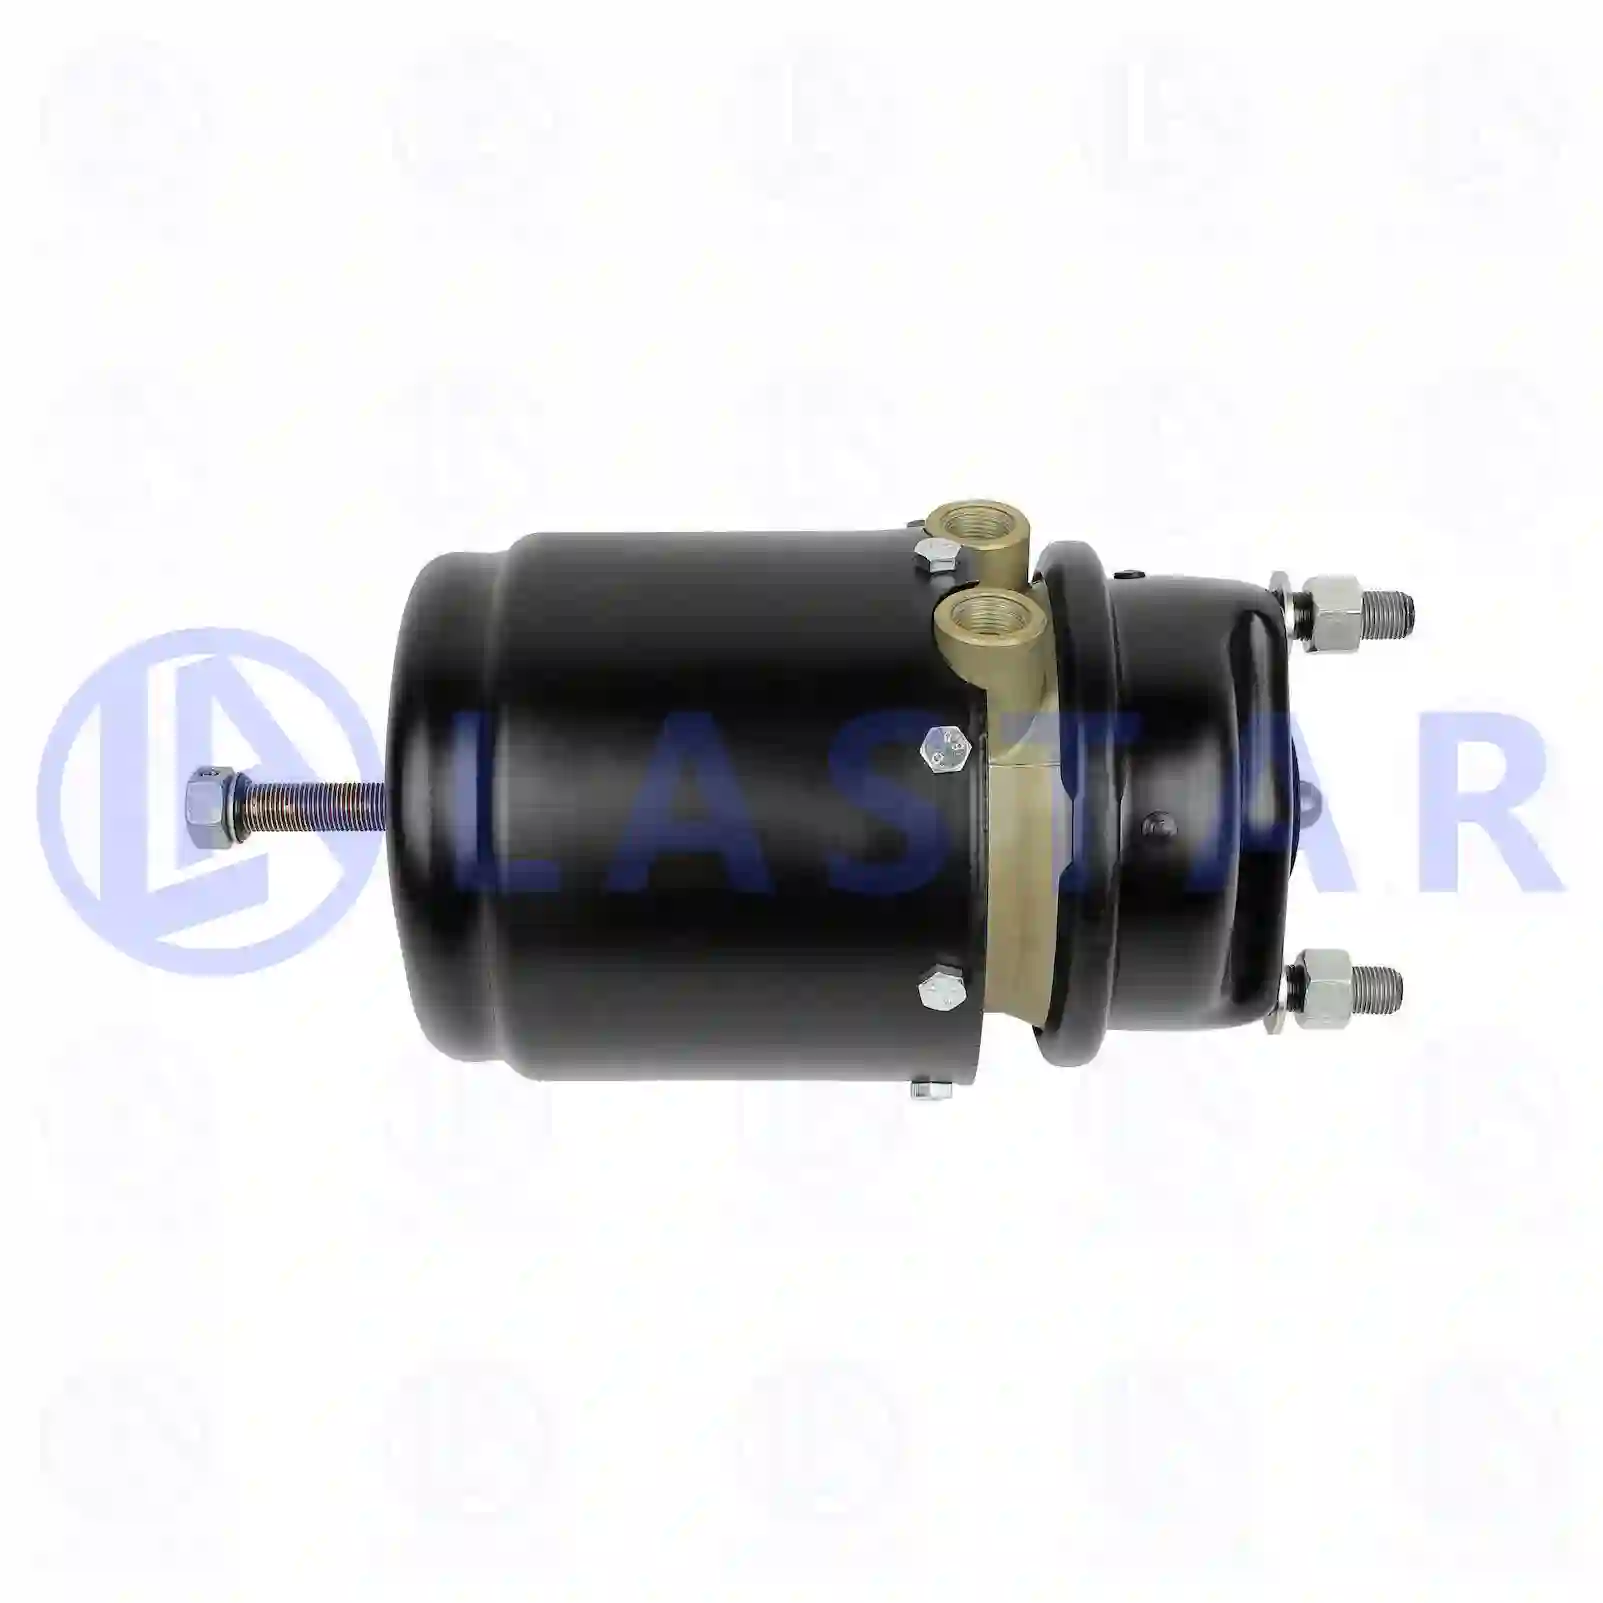 Spring brake cylinder, right, 77715392, 0154203318, 0154204118, 0194205318, 0194206318, ||  77715392 Lastar Spare Part | Truck Spare Parts, Auotomotive Spare Parts Spring brake cylinder, right, 77715392, 0154203318, 0154204118, 0194205318, 0194206318, ||  77715392 Lastar Spare Part | Truck Spare Parts, Auotomotive Spare Parts